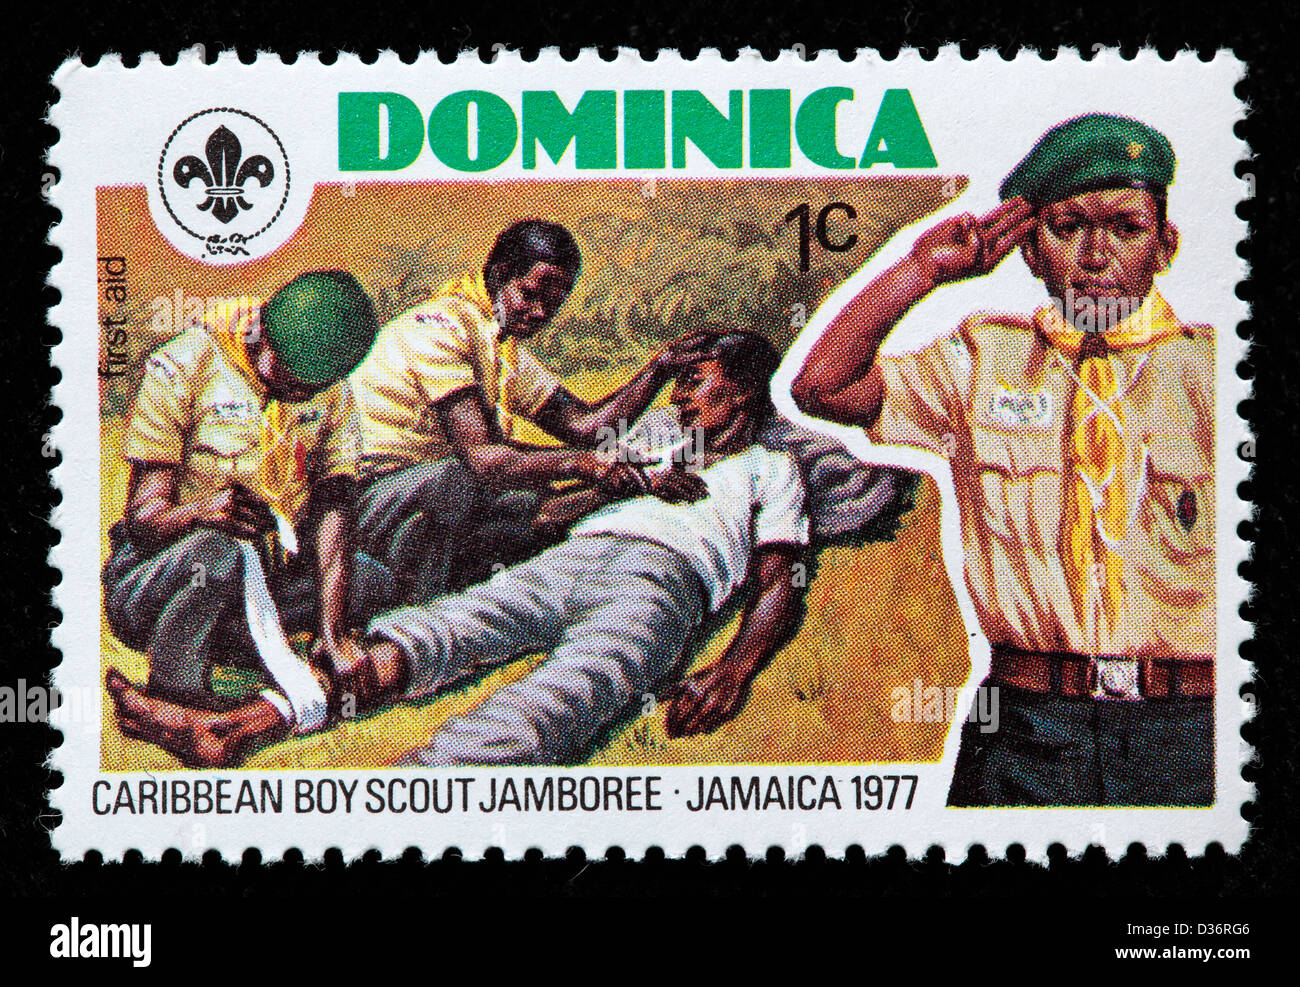 Caribbean boy scout jamboree, postage stamp, Dominica, 1977 Stock Photo